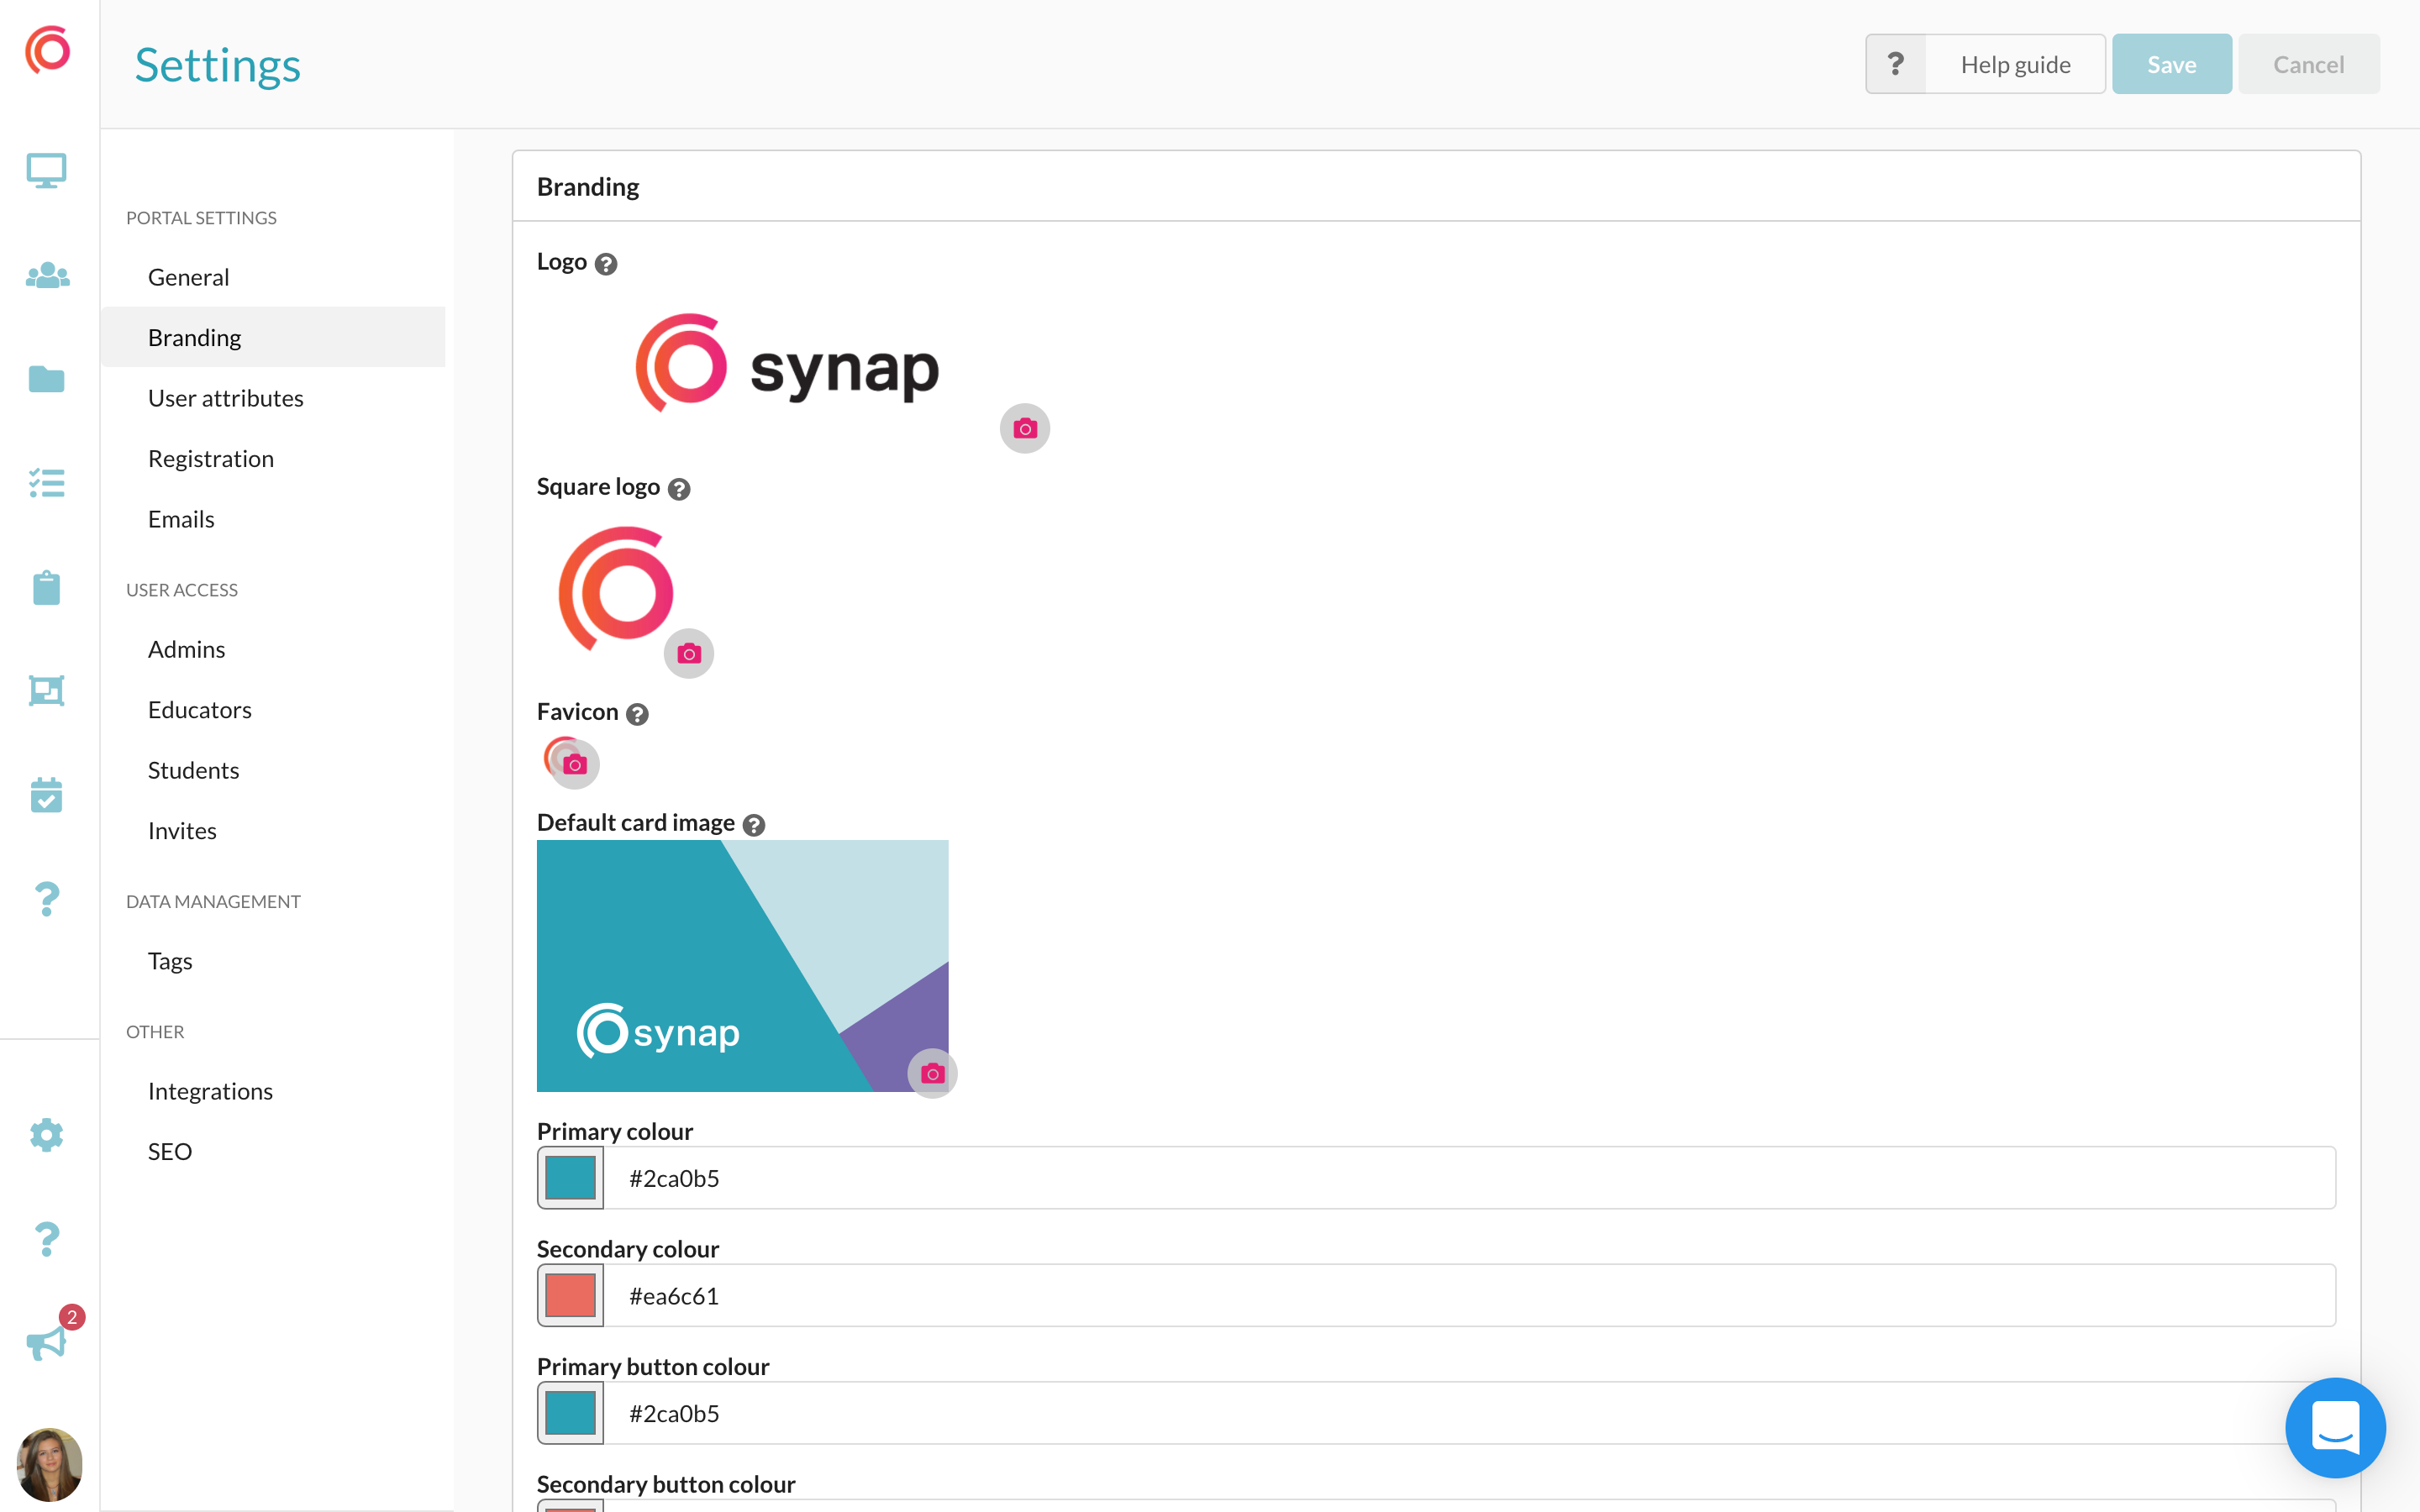 Synap Software - Completely brand your portal with your company logo, colours and images